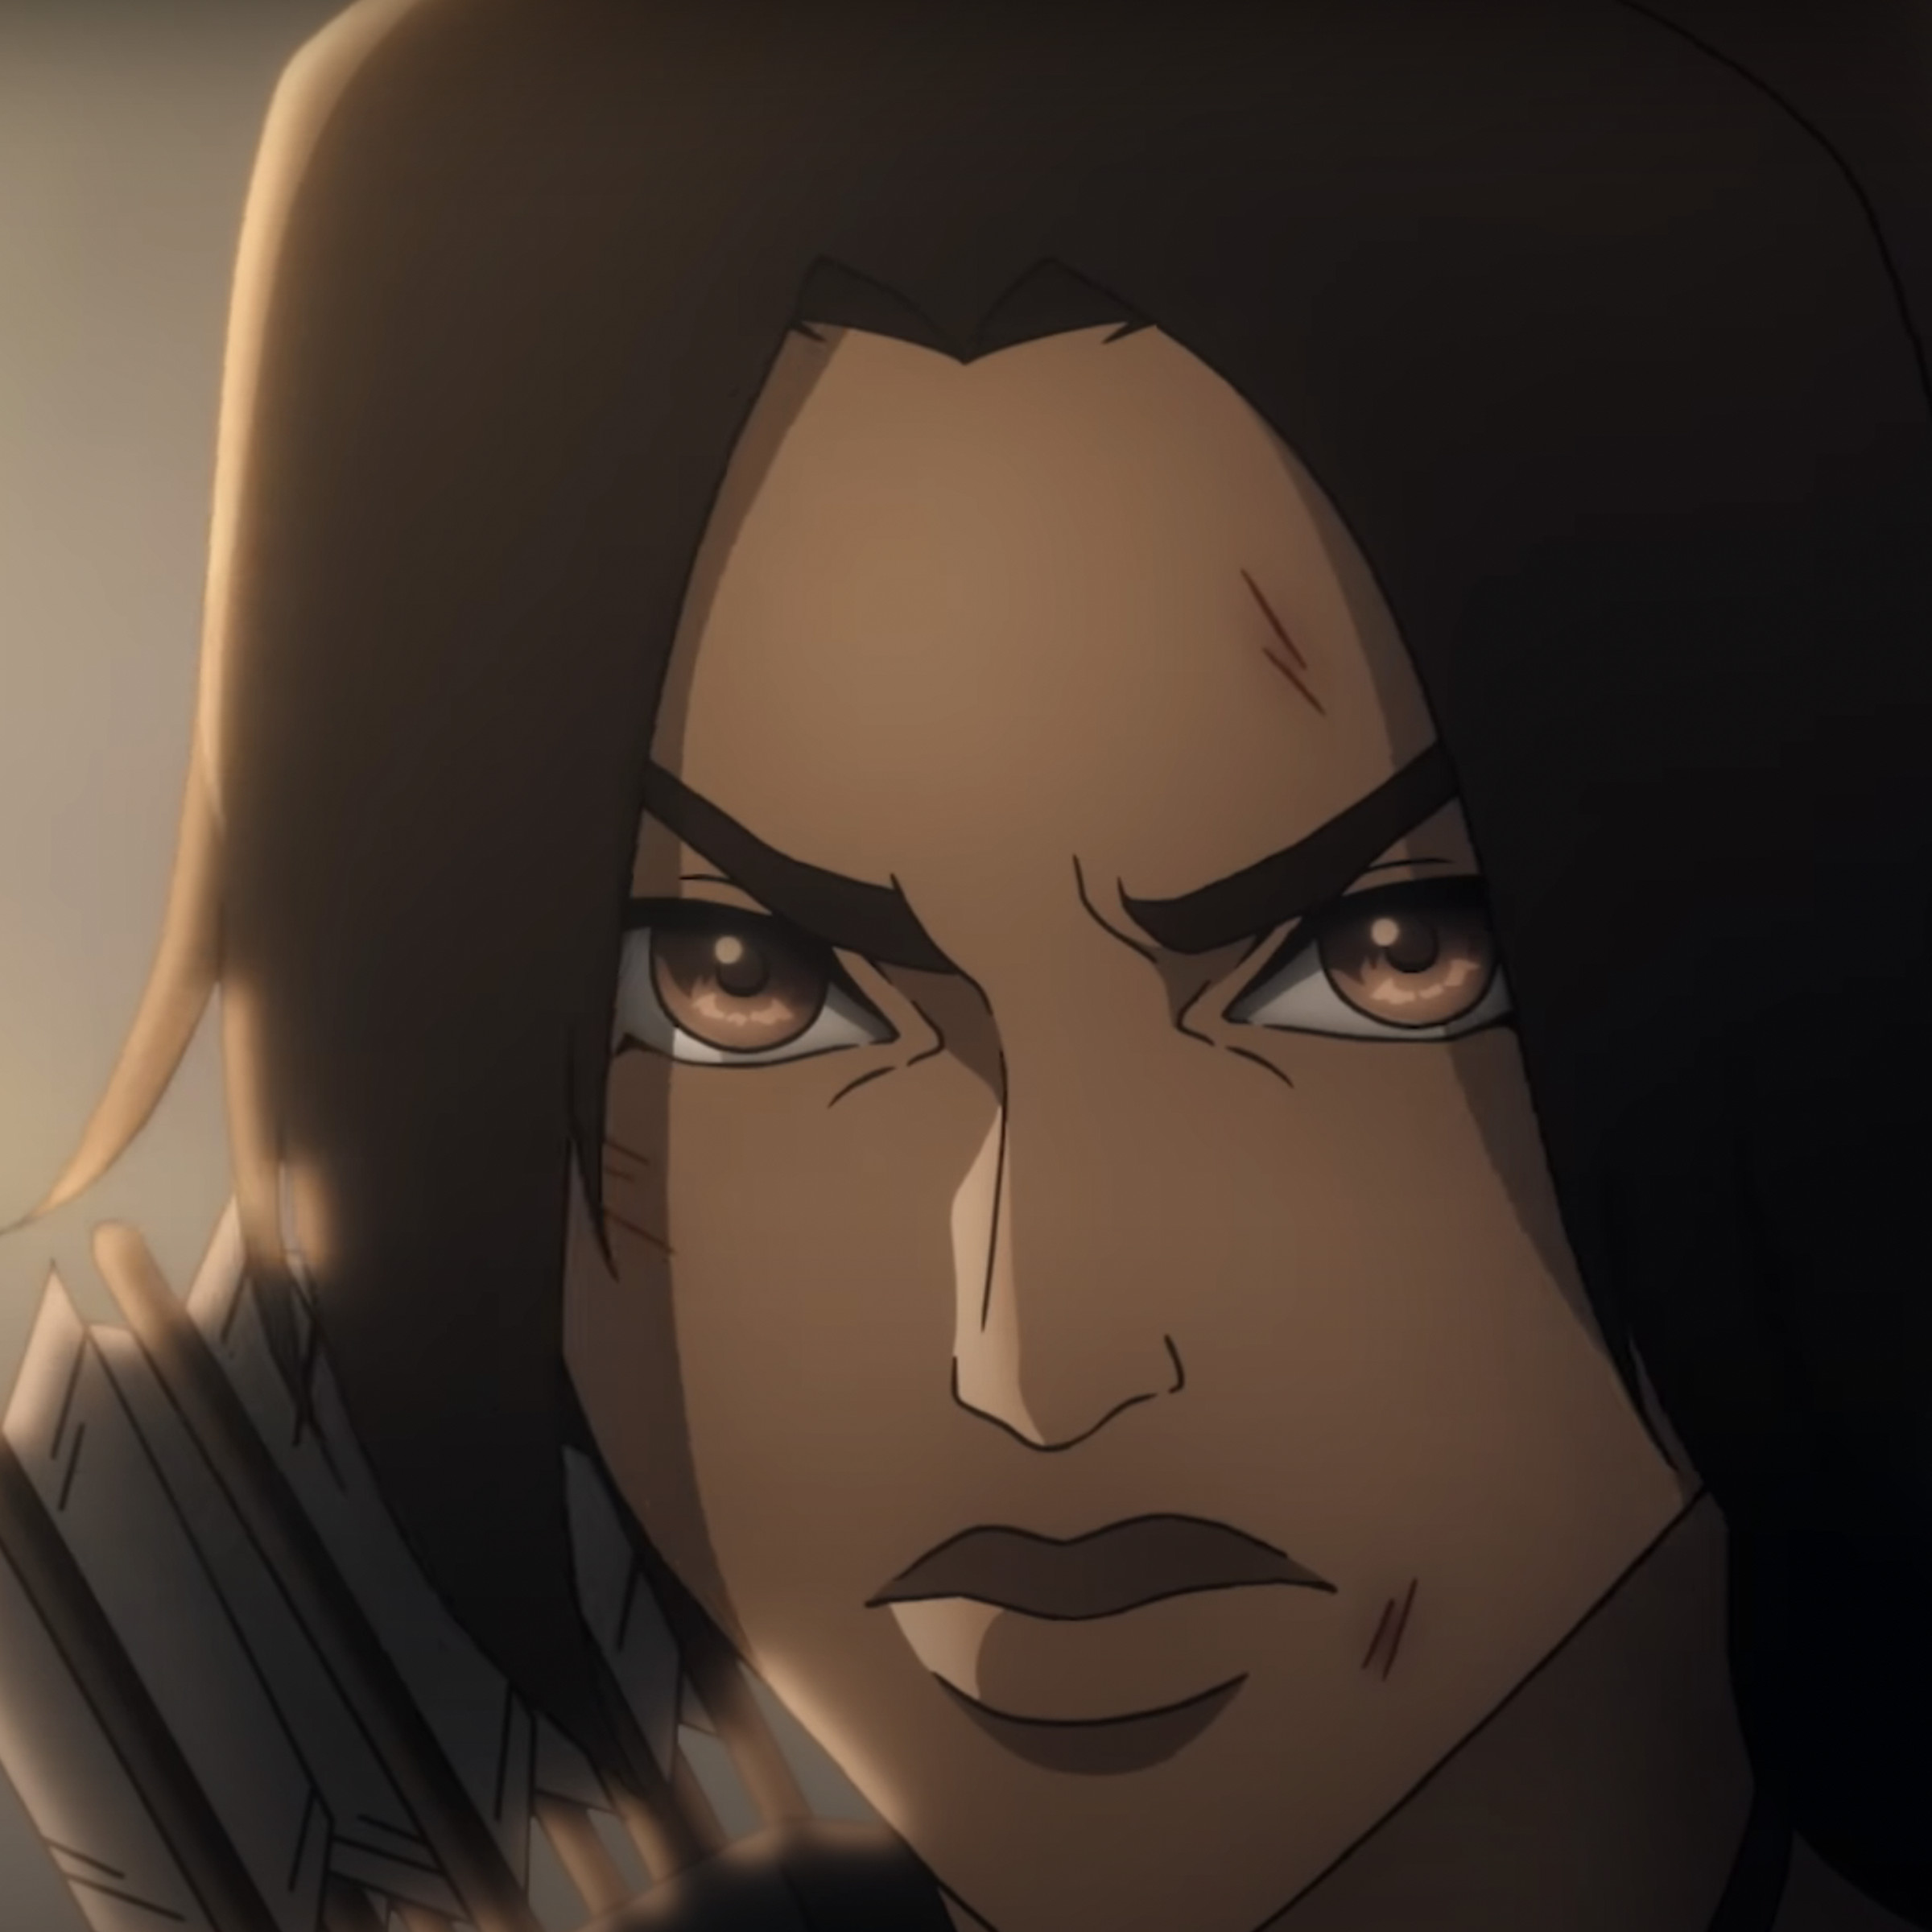 A still image from Netflix’s animated Tomb Raider series.